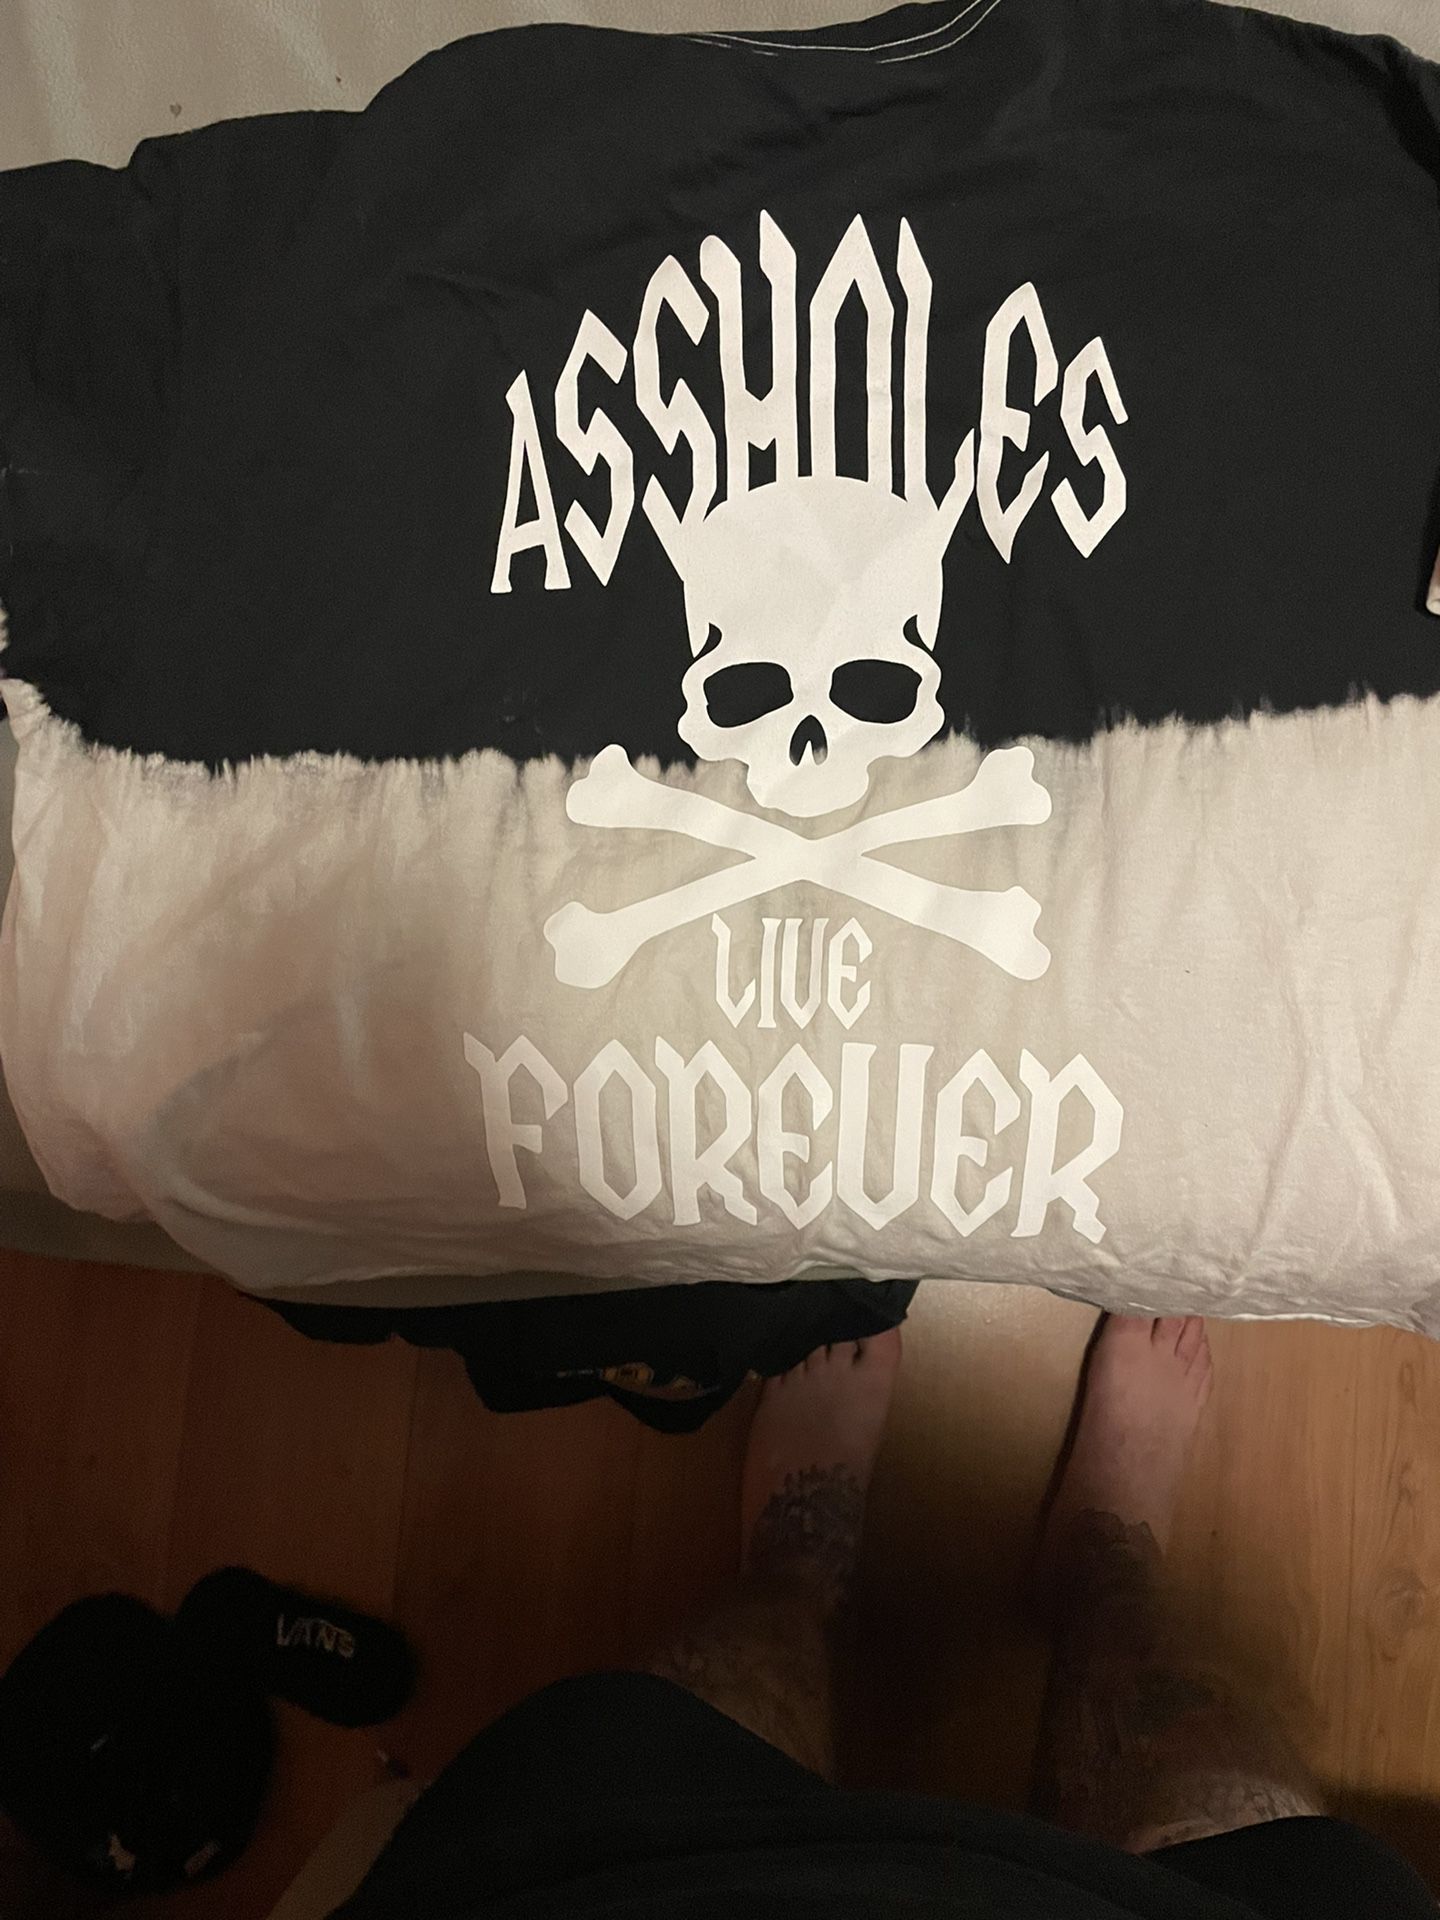 A#%holes Live Forever Brand New T-shirt 3x